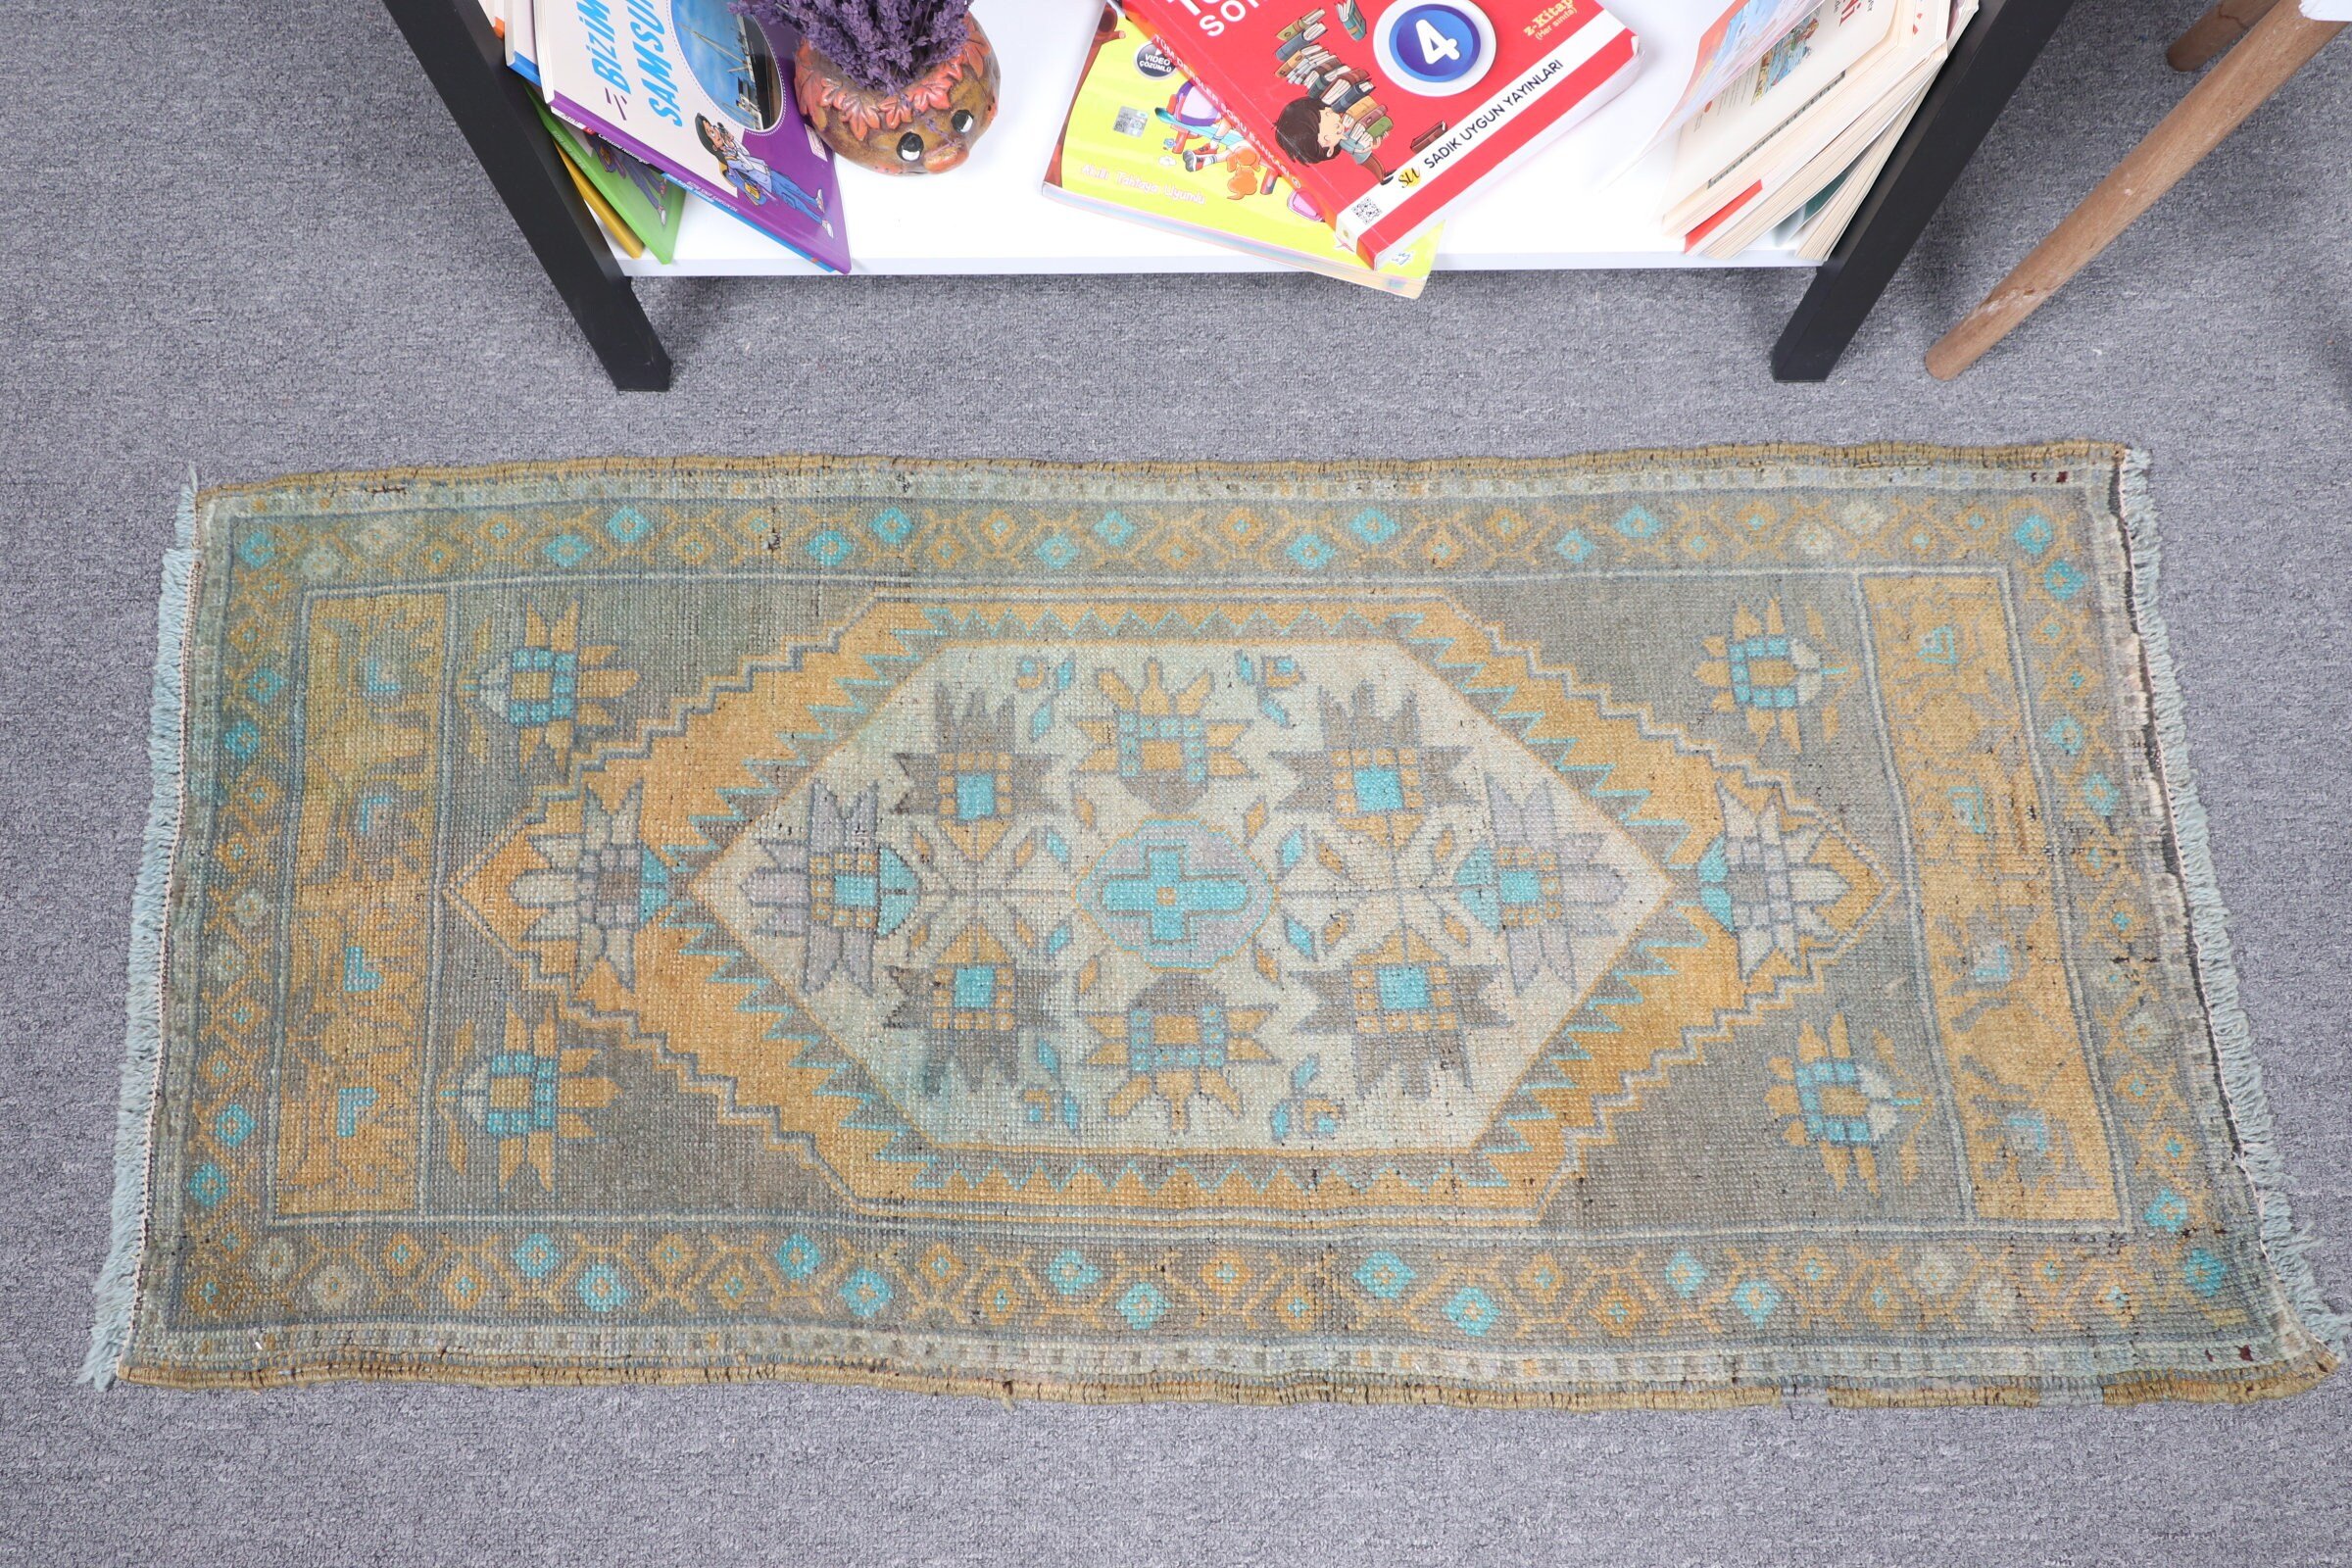 Cool Rugs, Turkish Rug, Bedroom Rug, Wall Hanging Rug, Kitchen Rug, Green Moroccan Rug, Rugs for Entry, 1.7x3.6 ft Small Rug, Vintage Rugs